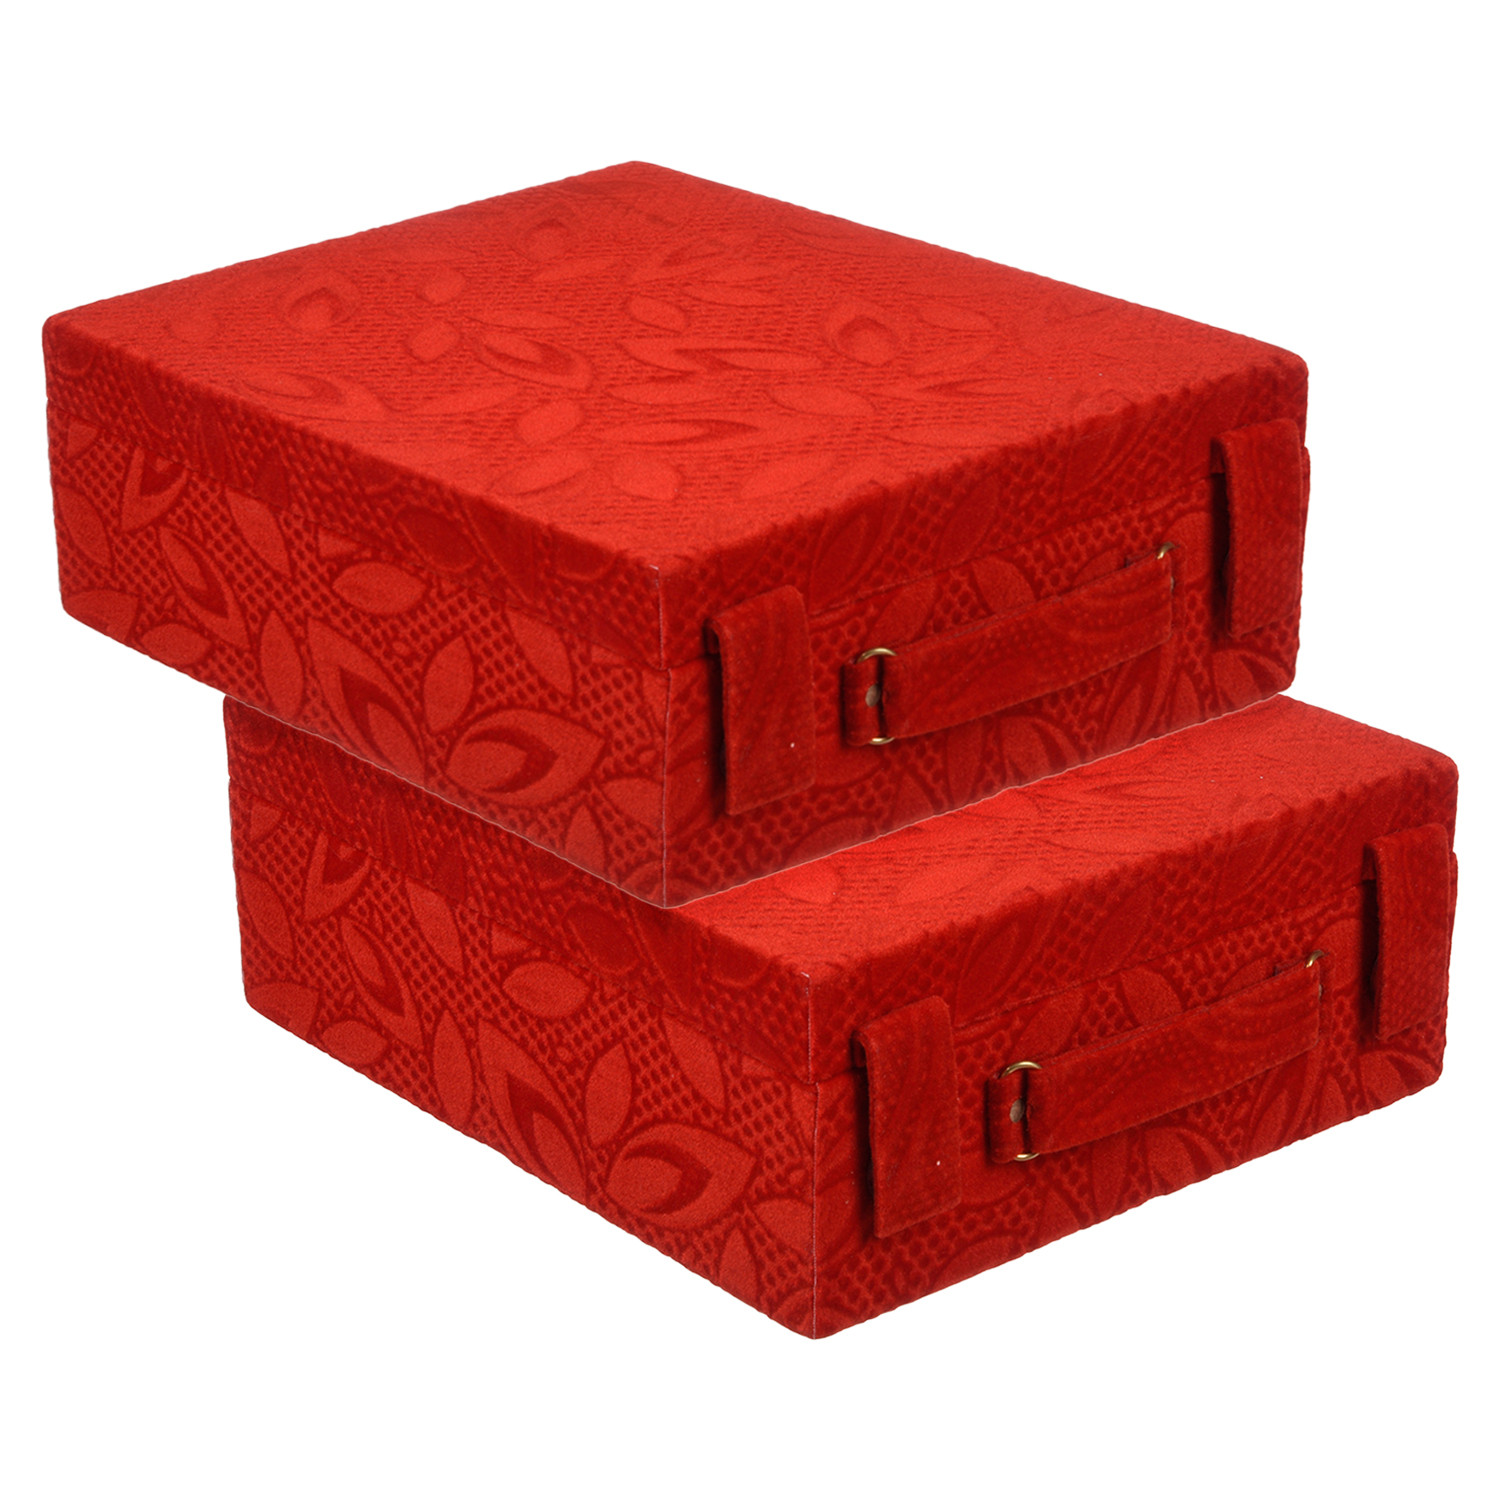 Bangle Box Storage Case for Bangles 4 x 2 Inches Buy Now